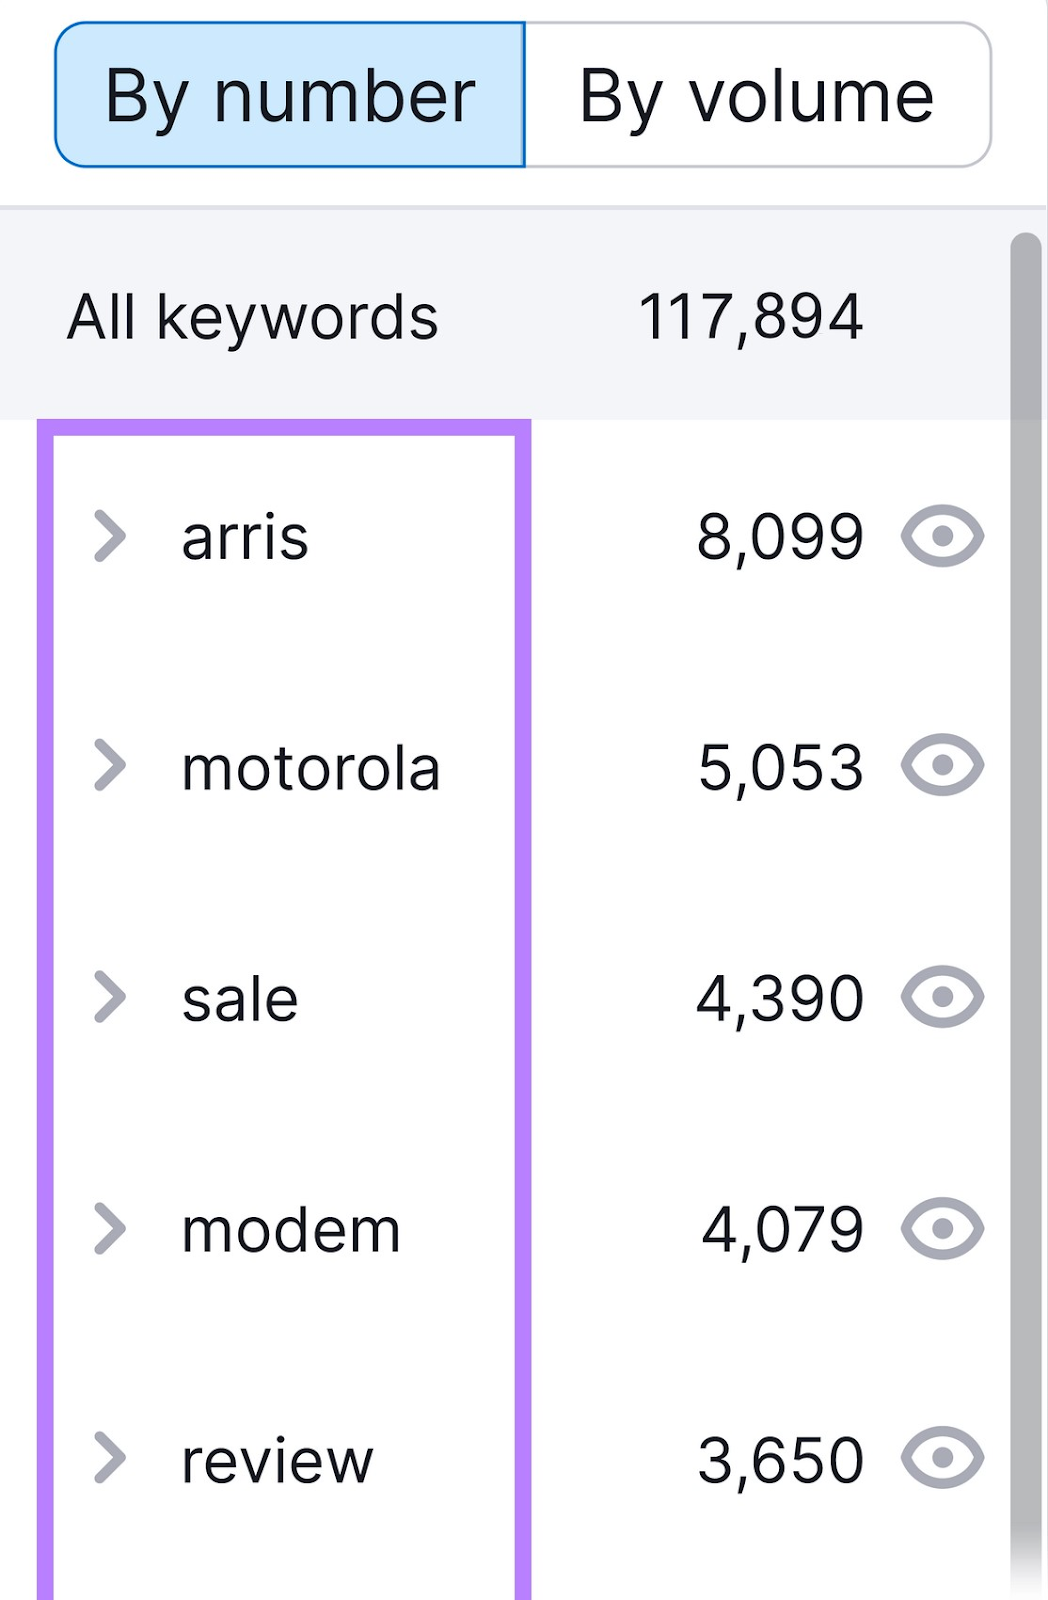 use column on the left to filter results by topic such as "arris, motorola, sale, modem, review"